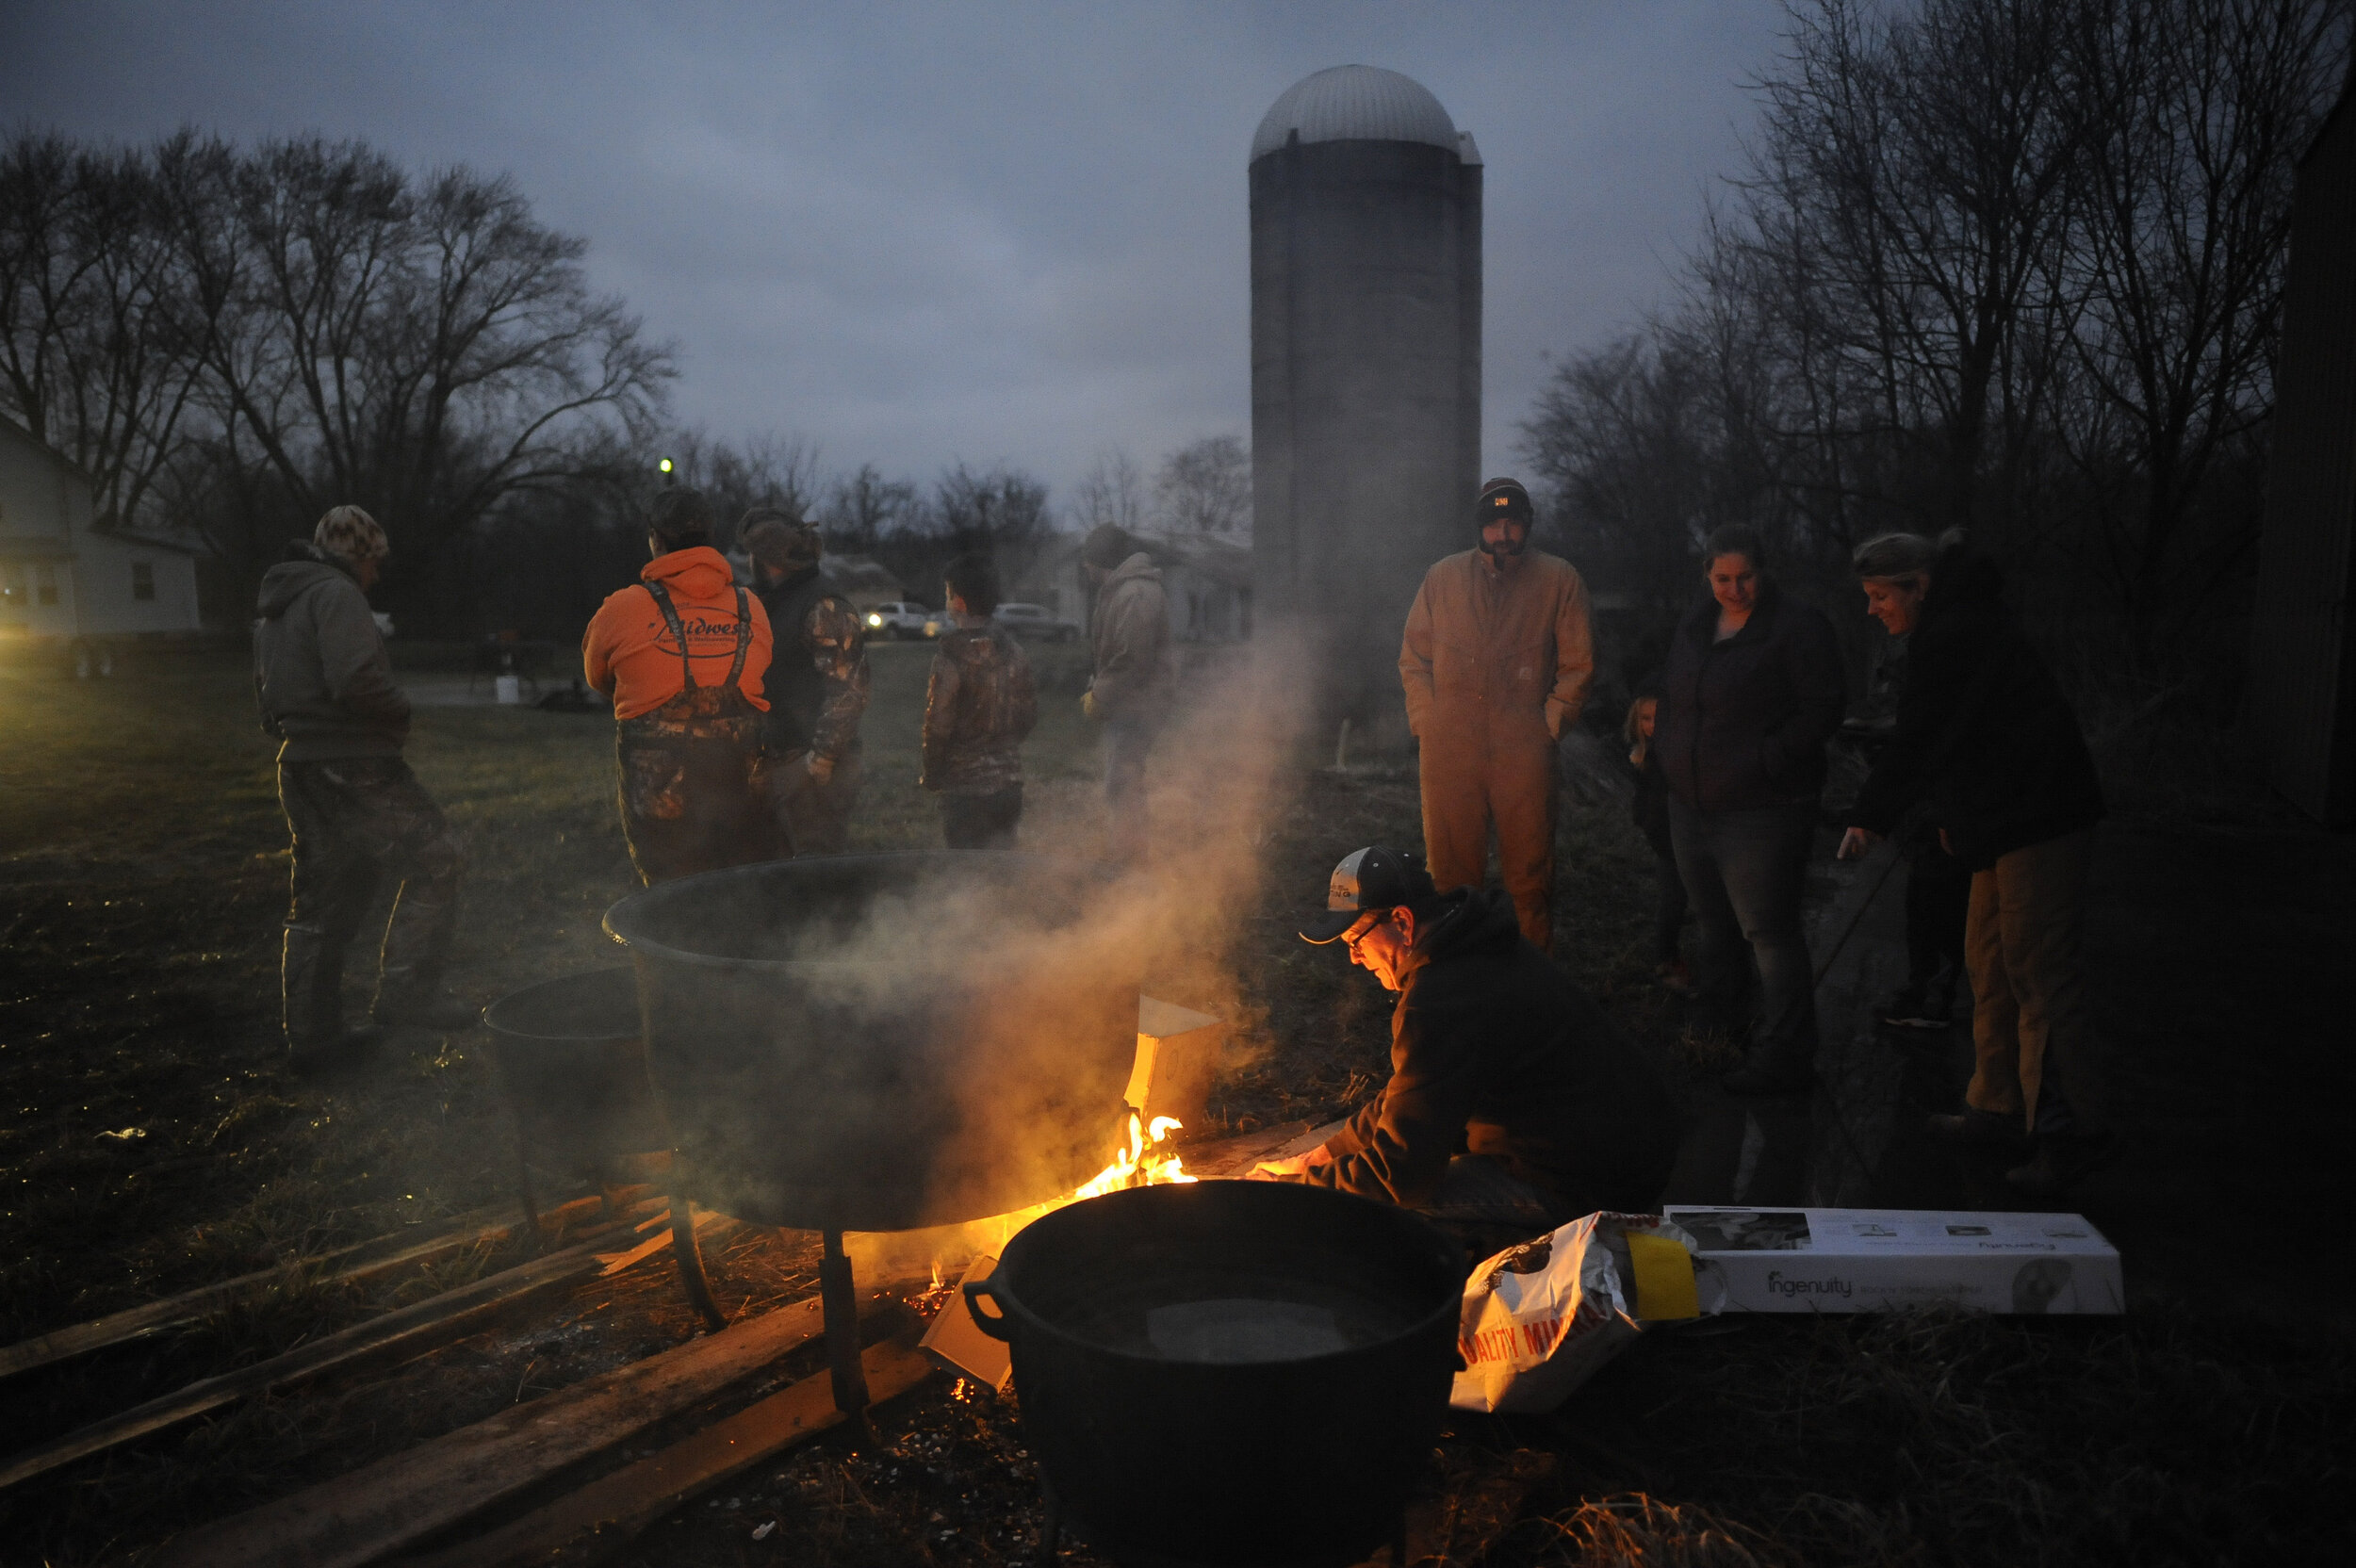  The oldest boy of Rueben Hotop's 13 children, Ronnie Hotop of Perryville, Missouri, lights a fire under a cooking pot shortly prior to 7 a.m. before the start of hog butchering on a farm in rural Perry County, Missouri. 